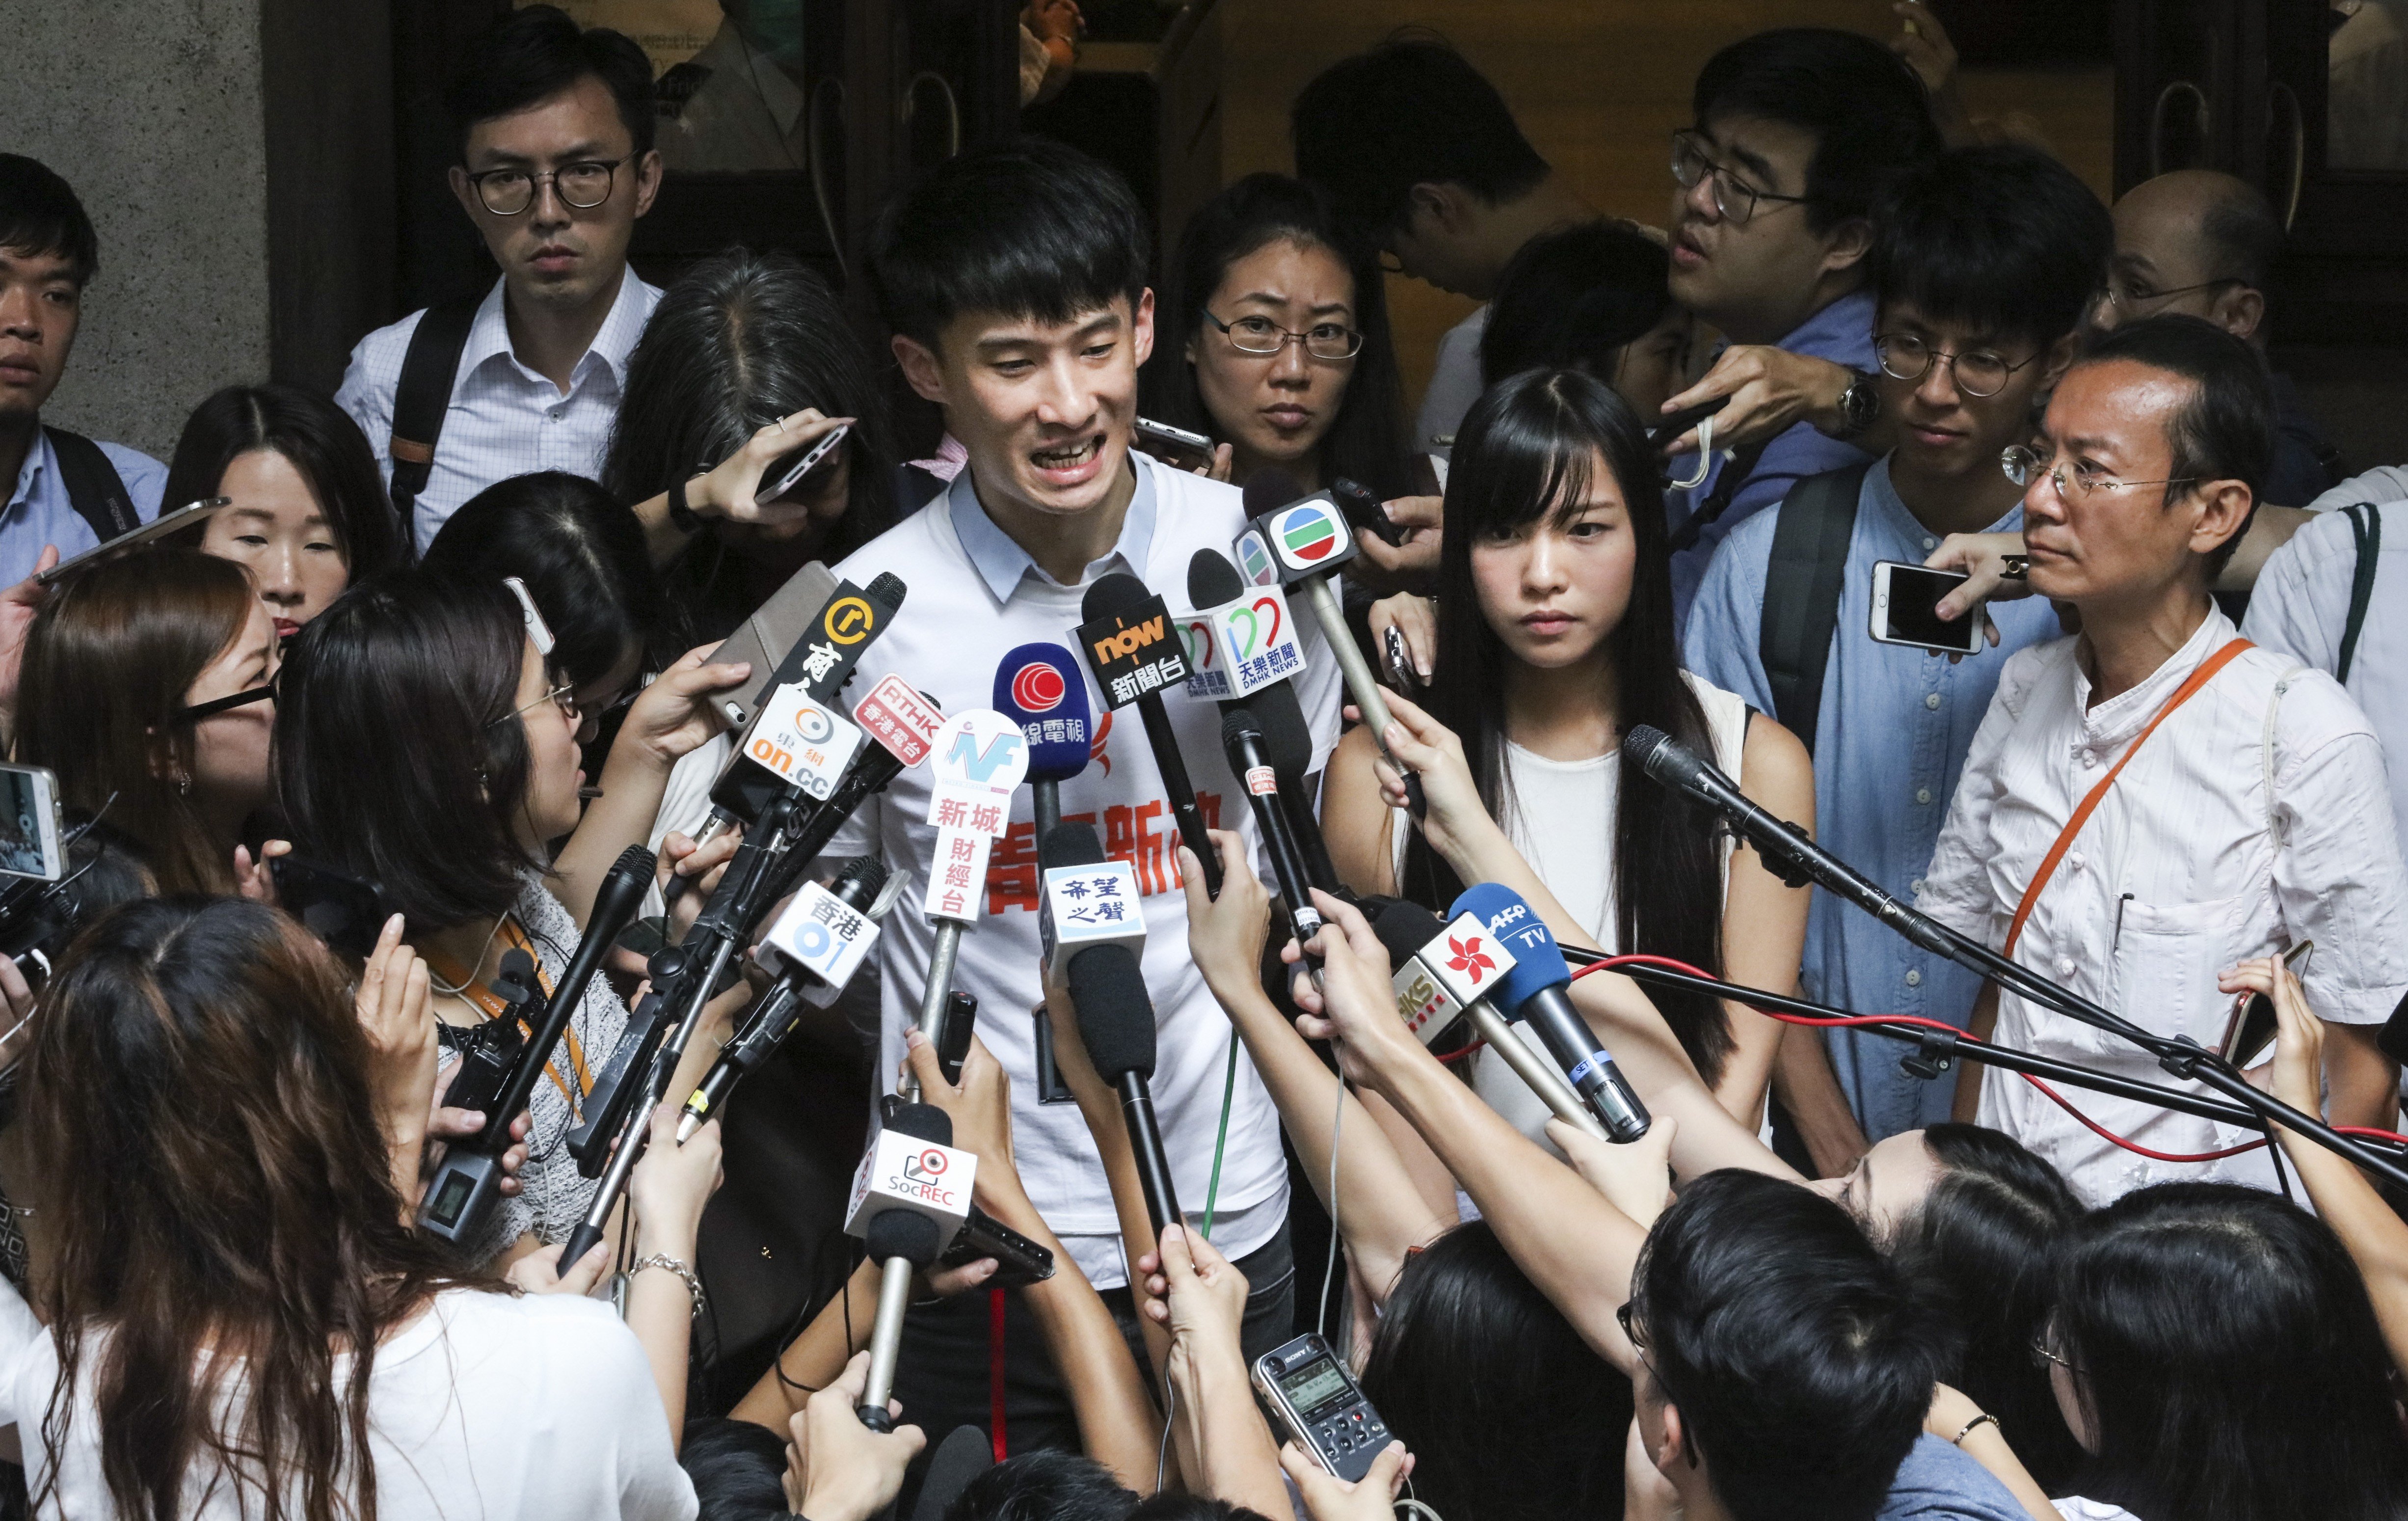 Youngspiration’s Sixtus Baggio Leung Chung-hang (left) and Yau Wai-ching (right) lost their appeal to retain their Legco seats in August, after they were disqualified for improper oath-taking last year. Photo: Felix Wong